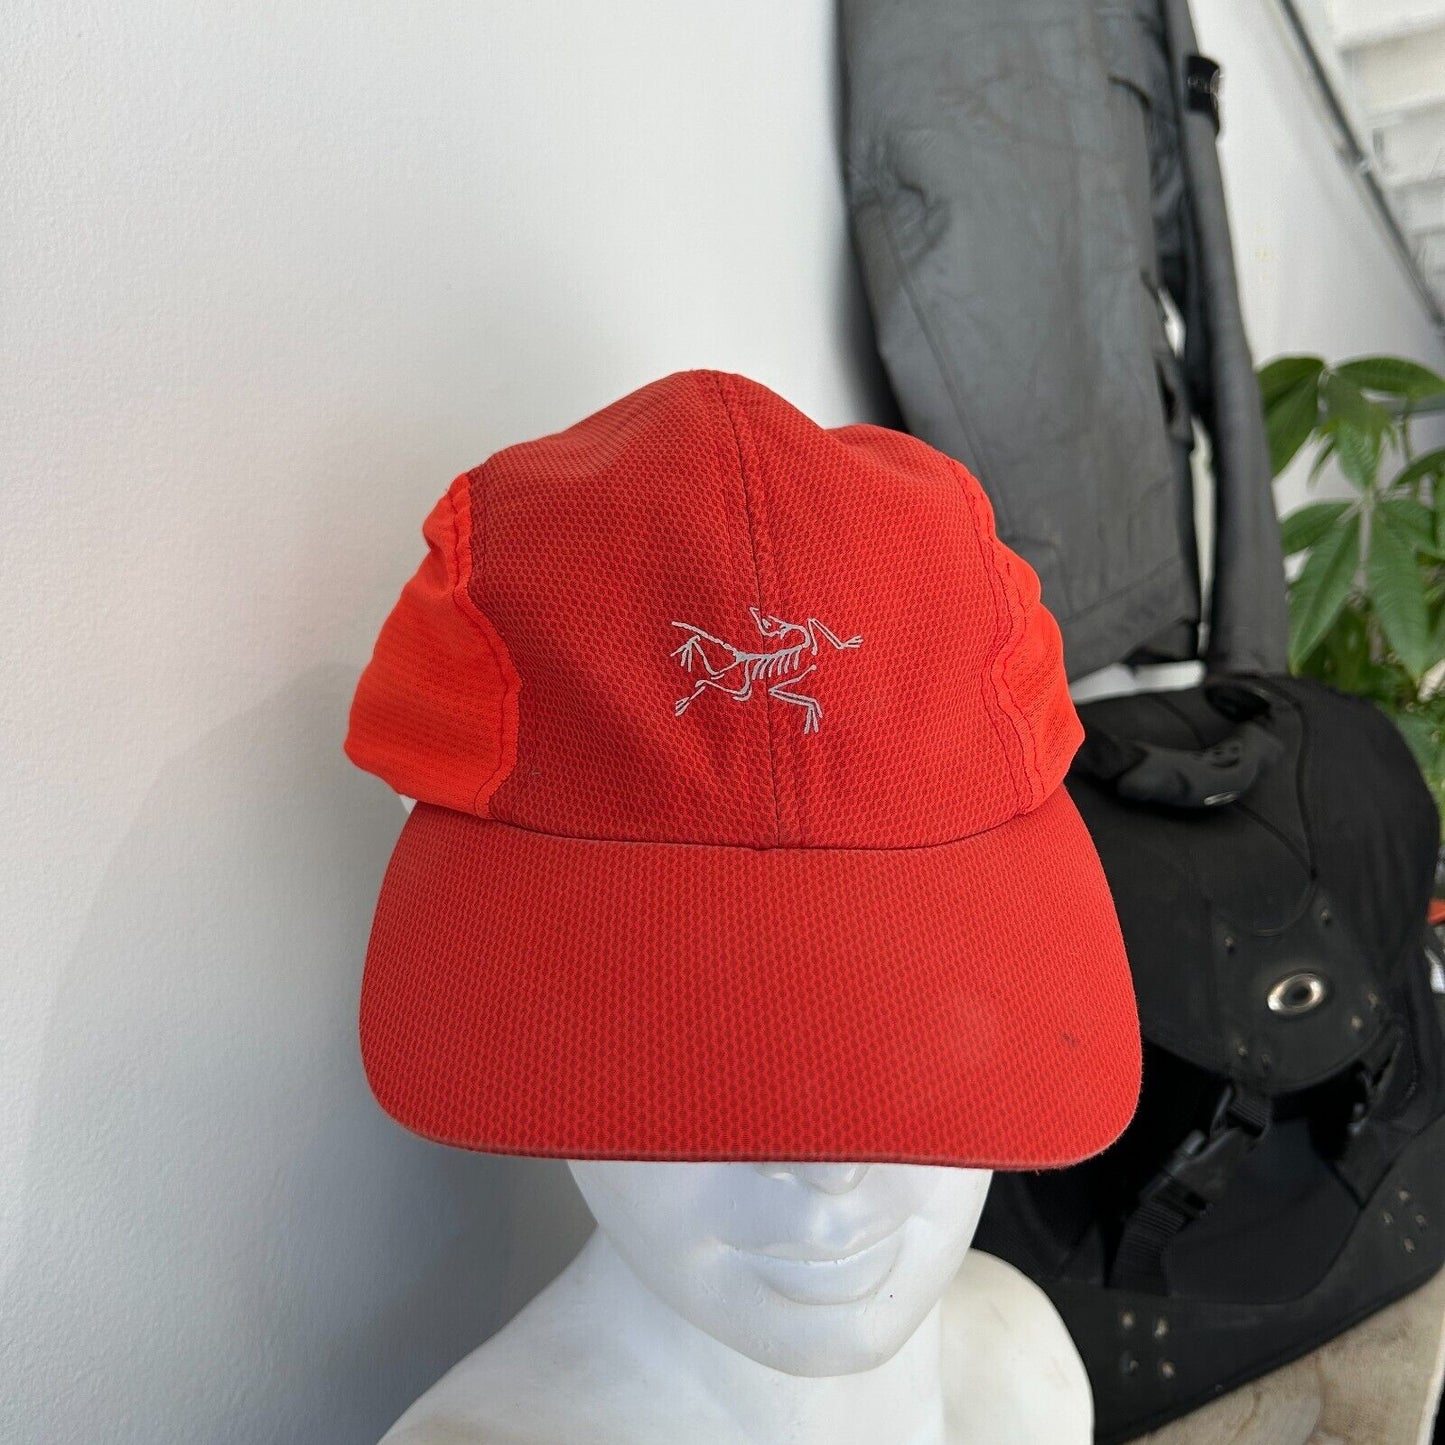 VINTAGE | ARC'TERYX 4 Panel Red Mesh Cycling Cap HAT One Size Adult